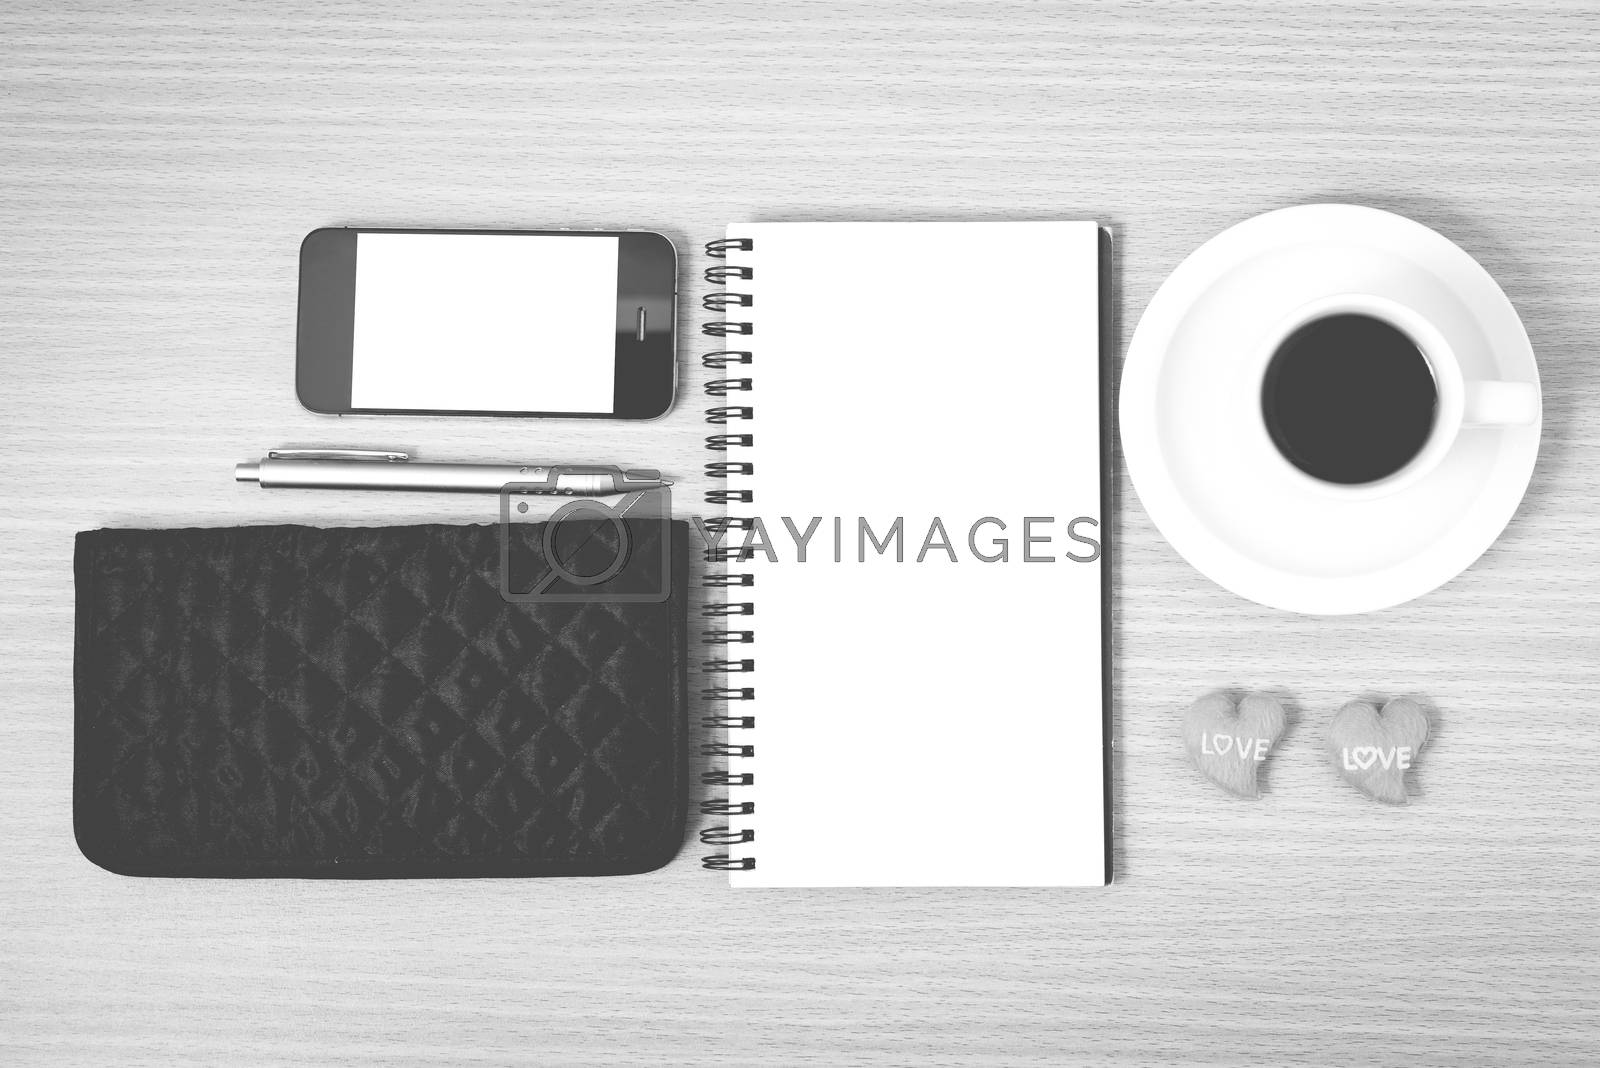 Royalty free image of working table : coffee with phone,notepad,wallet and red heart b by ammza12